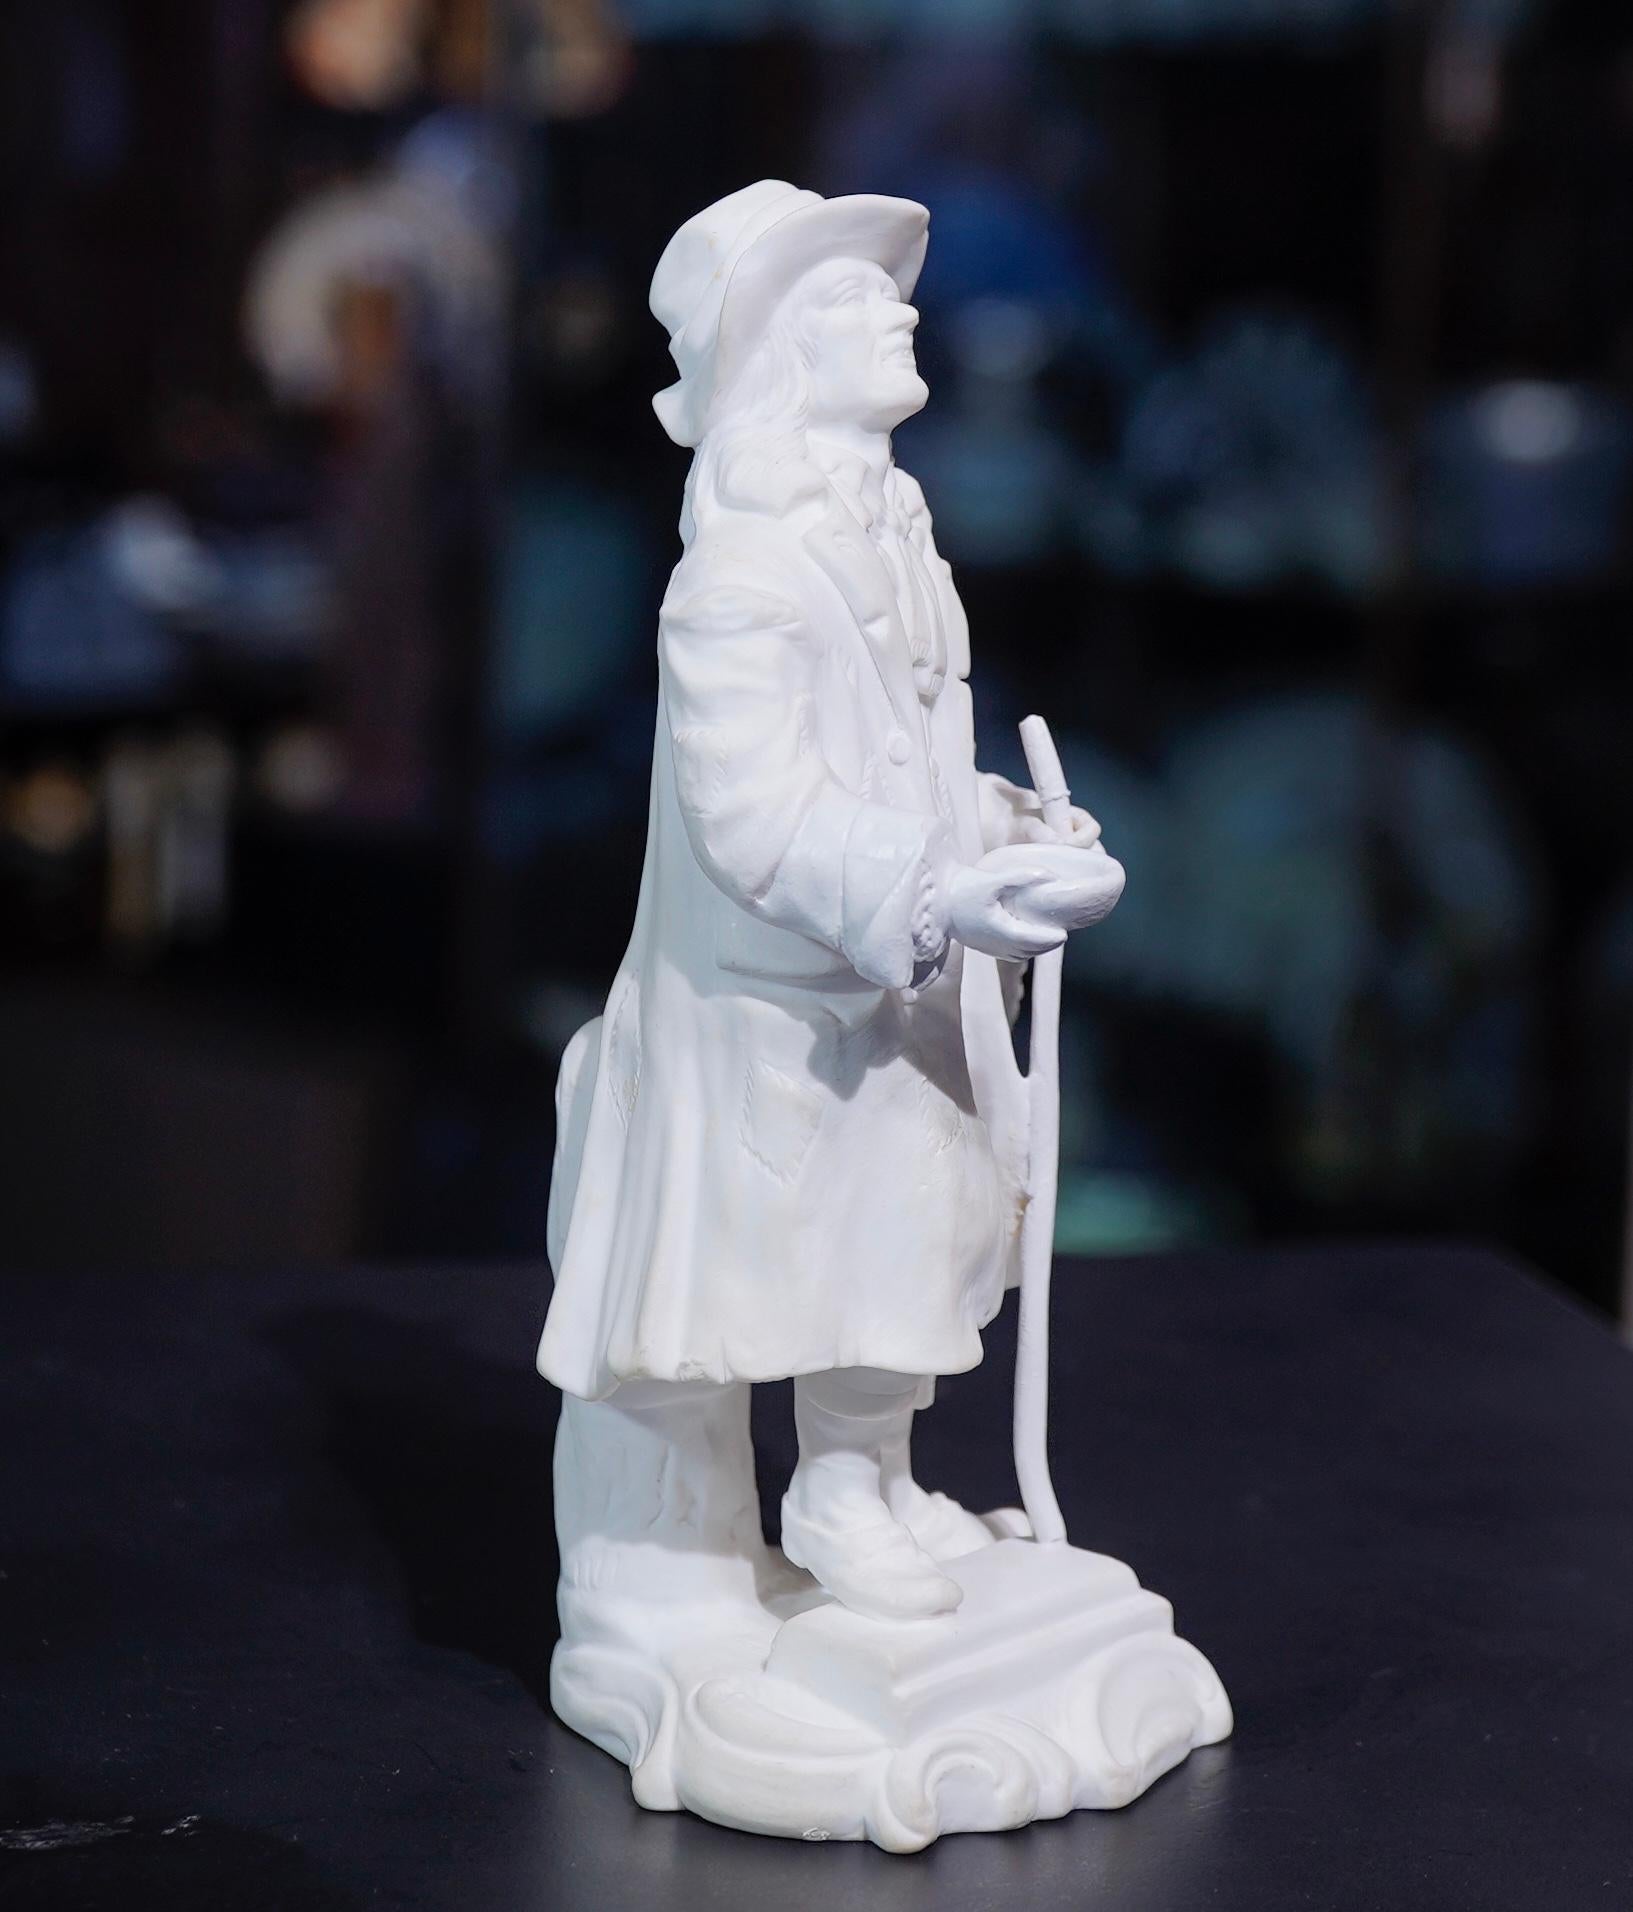 Minton bisque porcelain figure of a beggar, modelled standing in loose and patched clothing, a staff in one hand, a bowl in the other.
Unmarked, no.95 in the original Minton model book,
circa 1835

Ref Godden ‘Minton’ p93 for the listing, no.95-